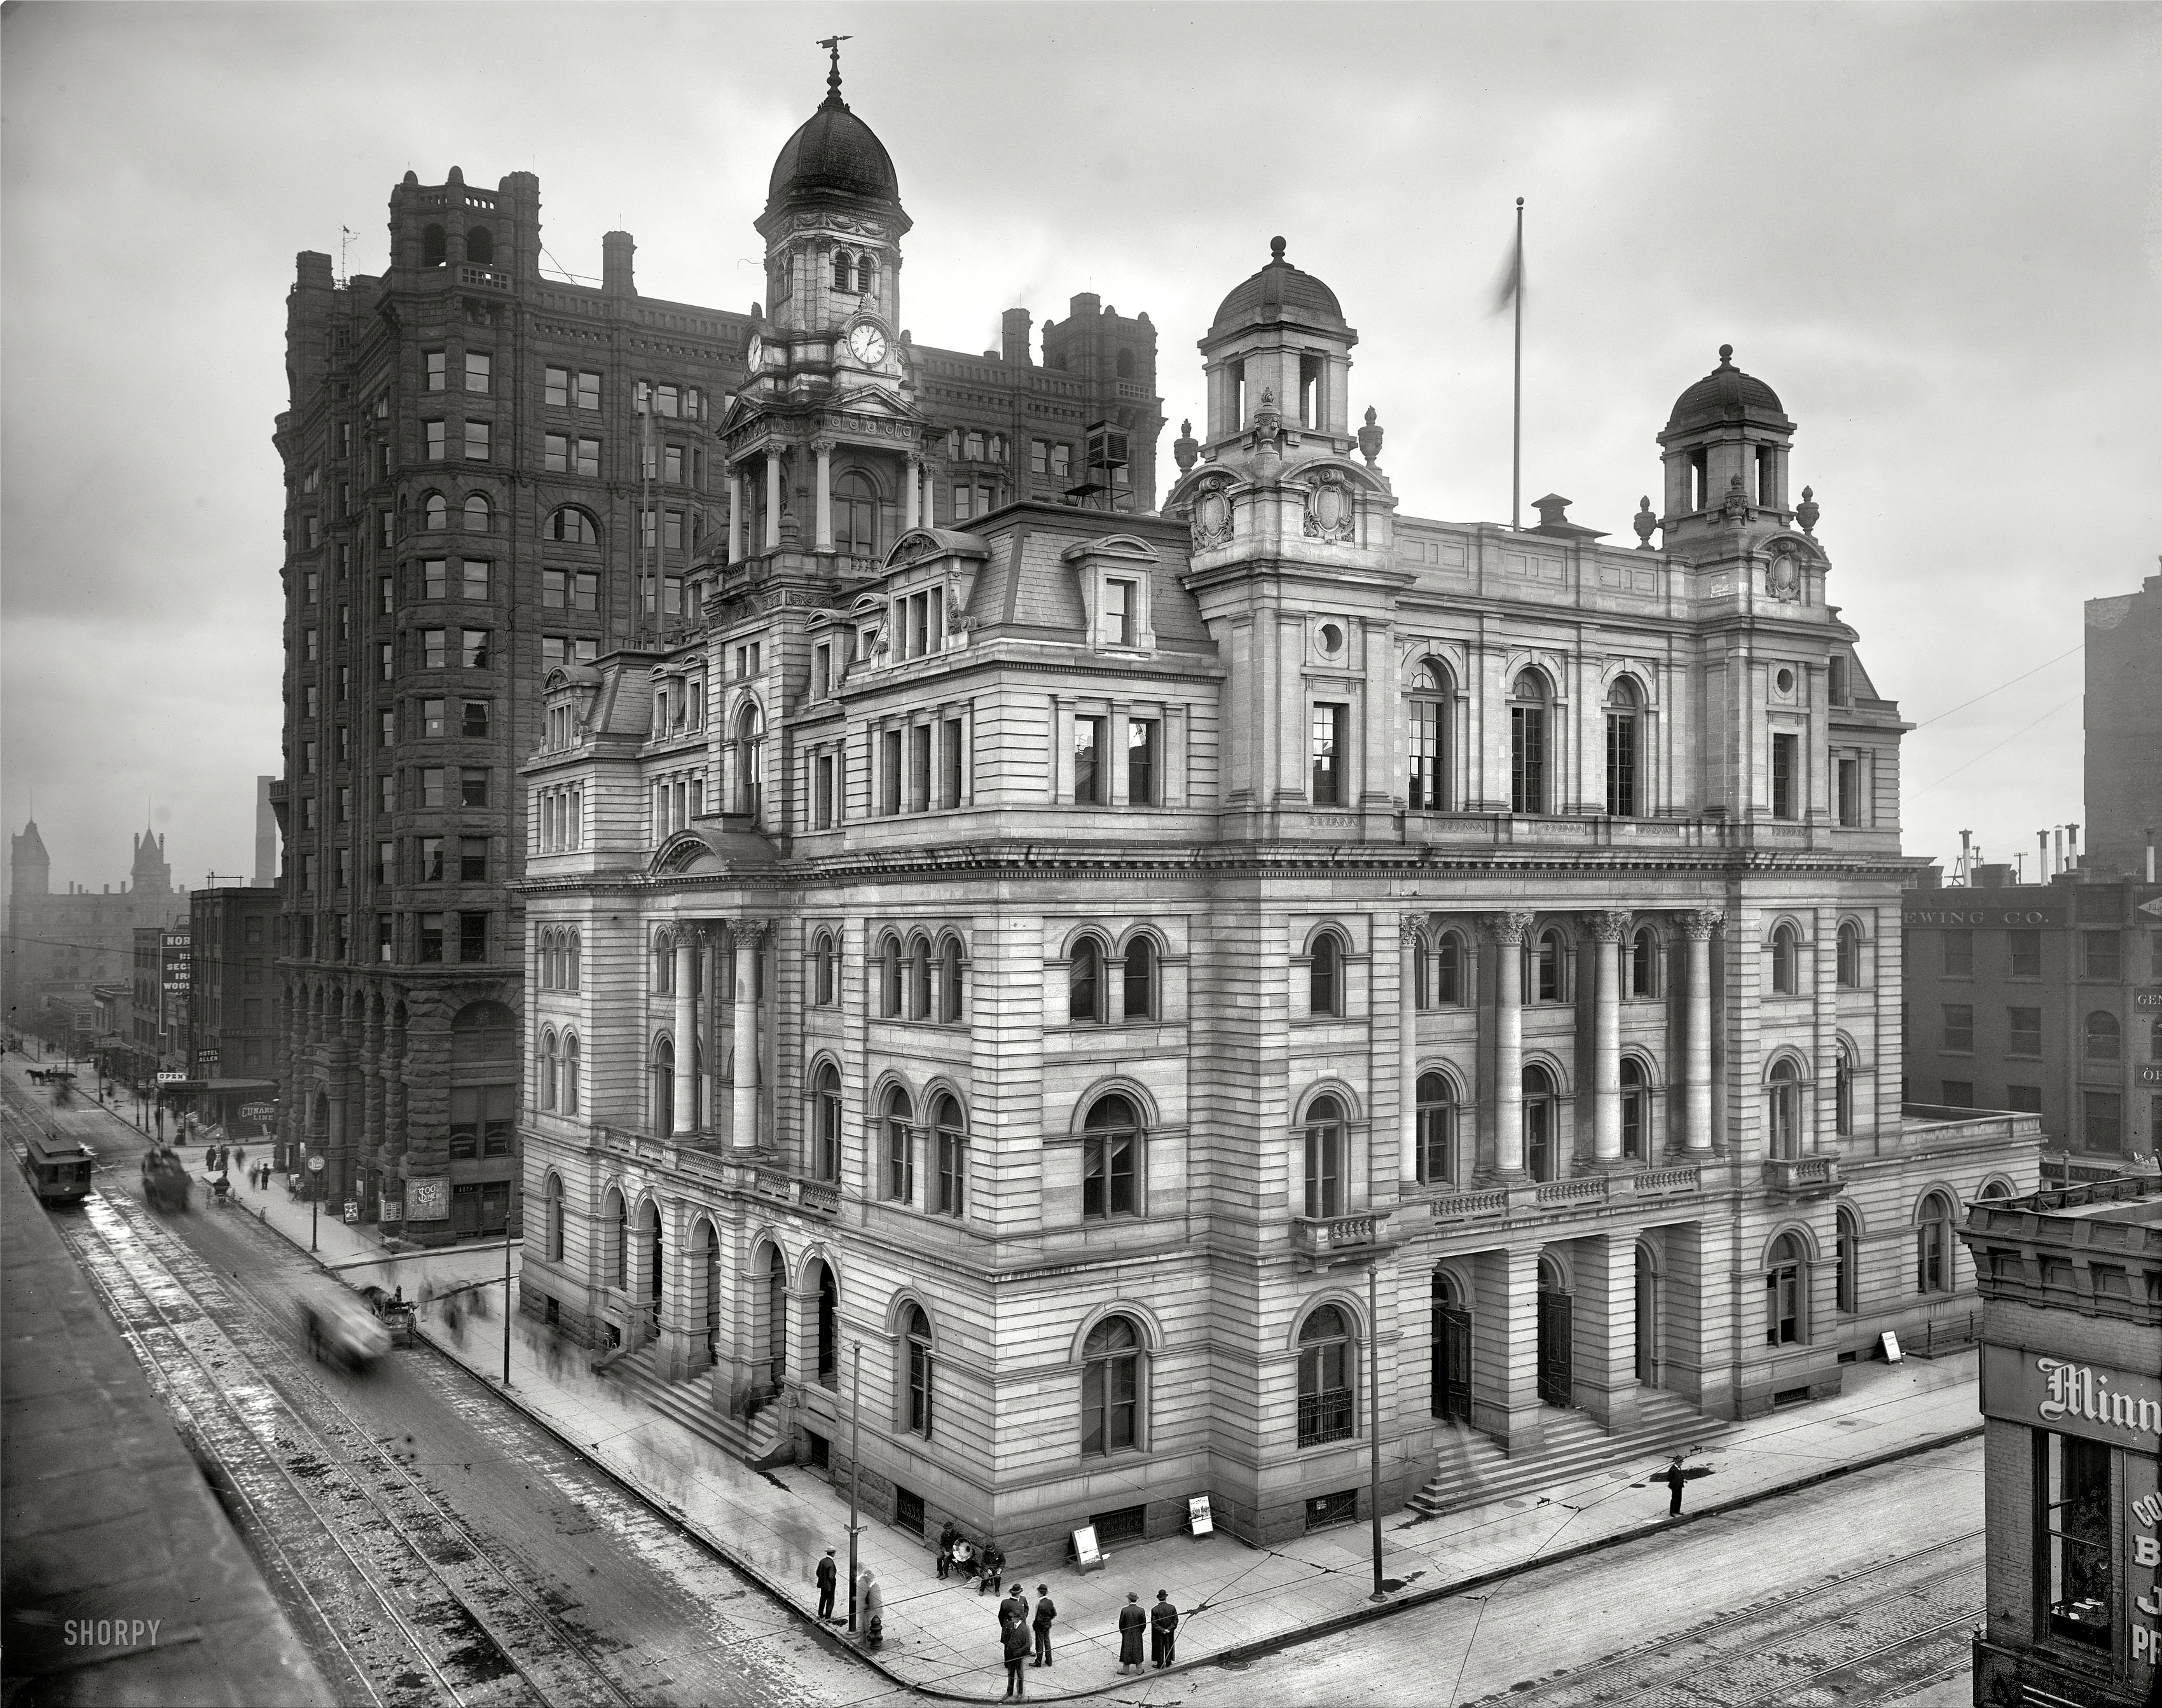 Hennepin County, Minnesota, circa 1908. "Minneapolis Post Office." Another white edifice slowly succumbs to soot. Note the turn-of-the-century boombox playing on the corner, and the many spectral pedestrians. View full size.